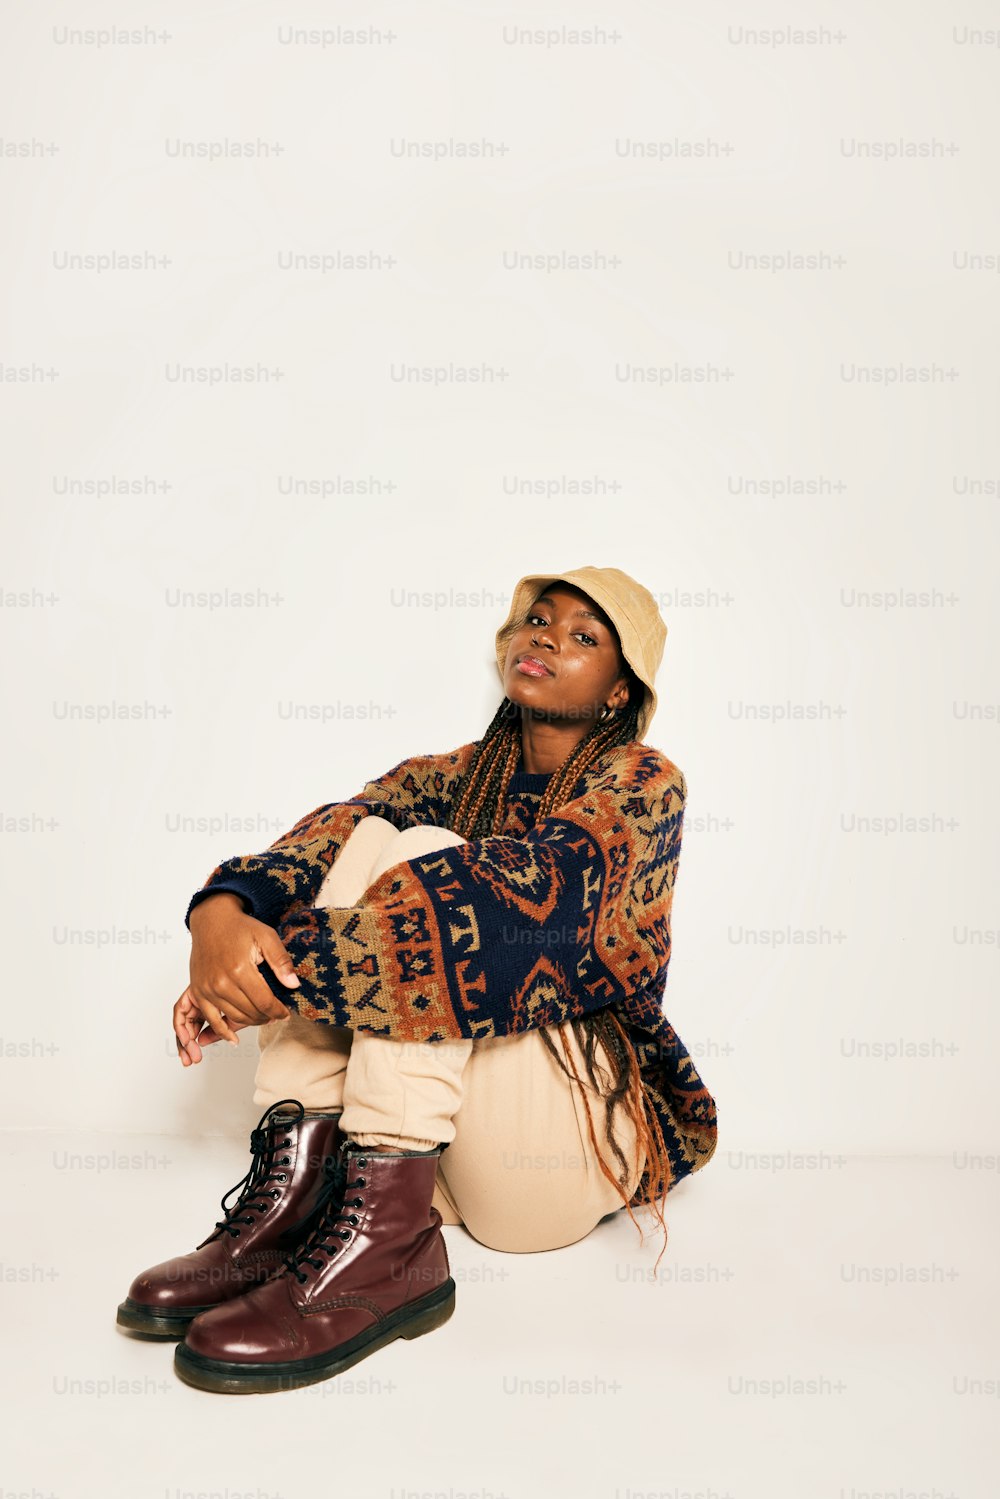 a woman sitting on the ground wearing a hat and boots